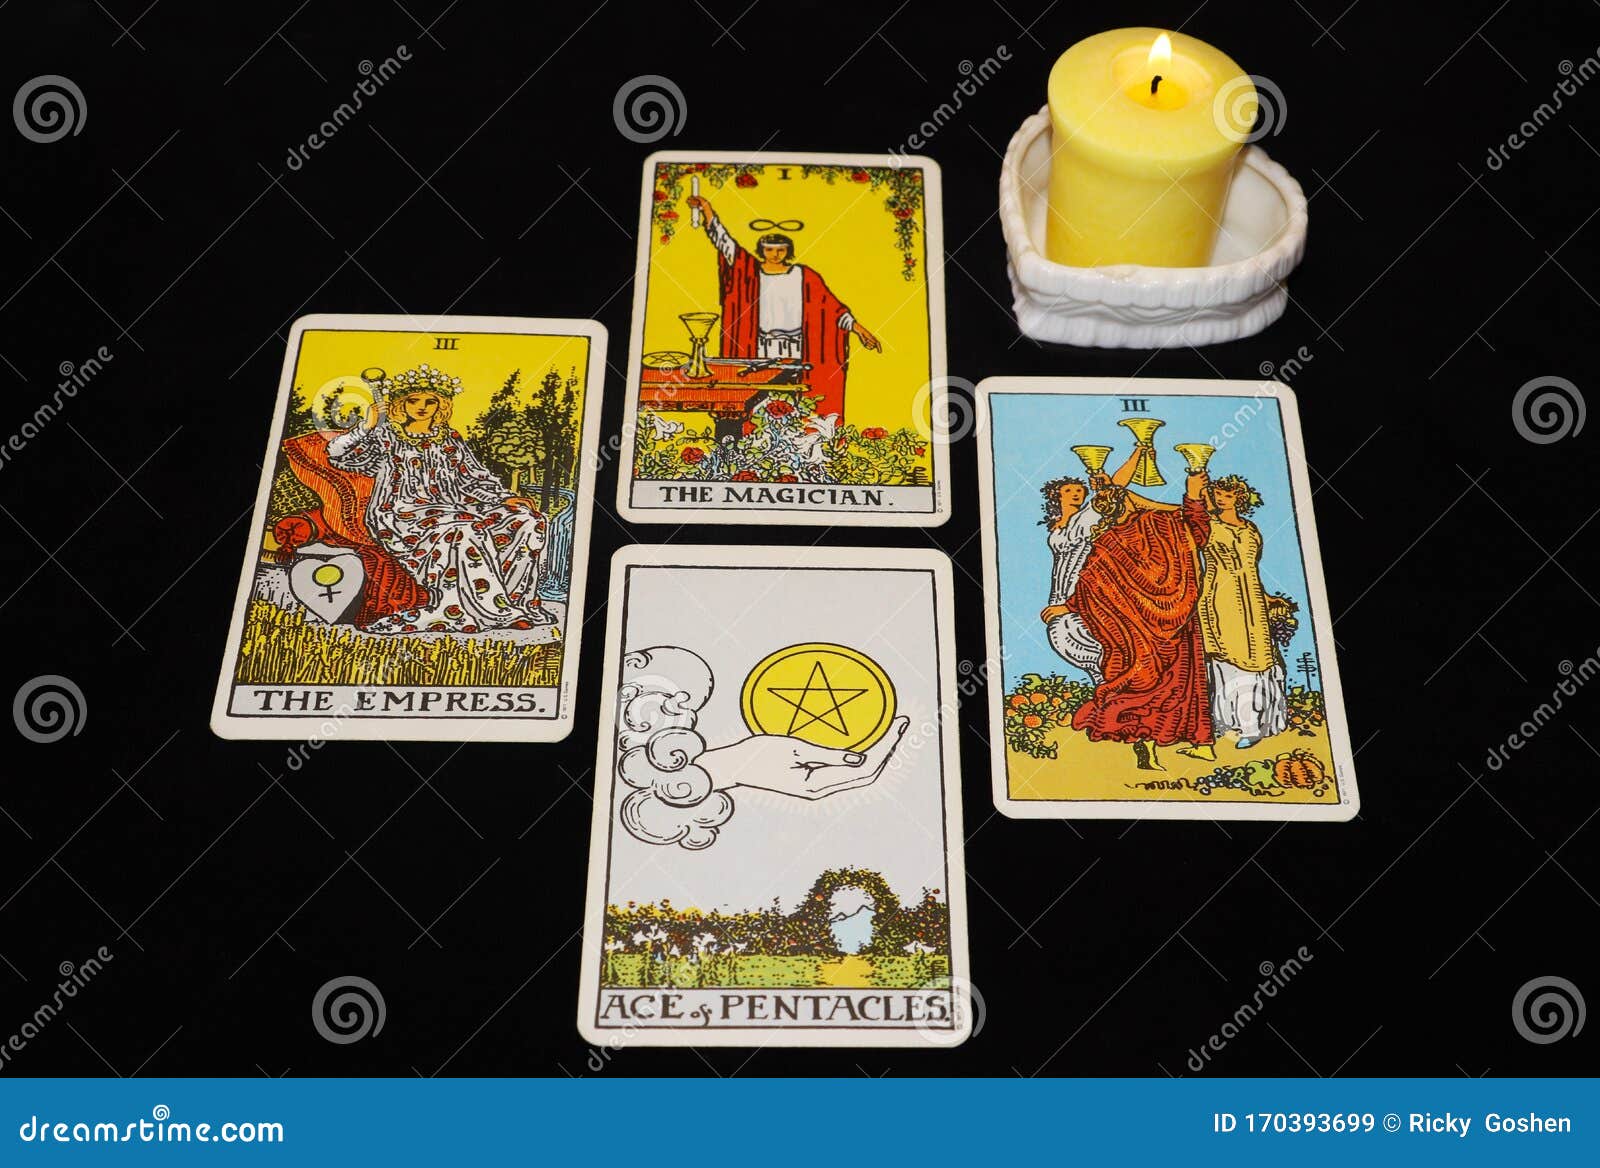 Tarot Card and Yellow Candle. Image - Image of 170393699